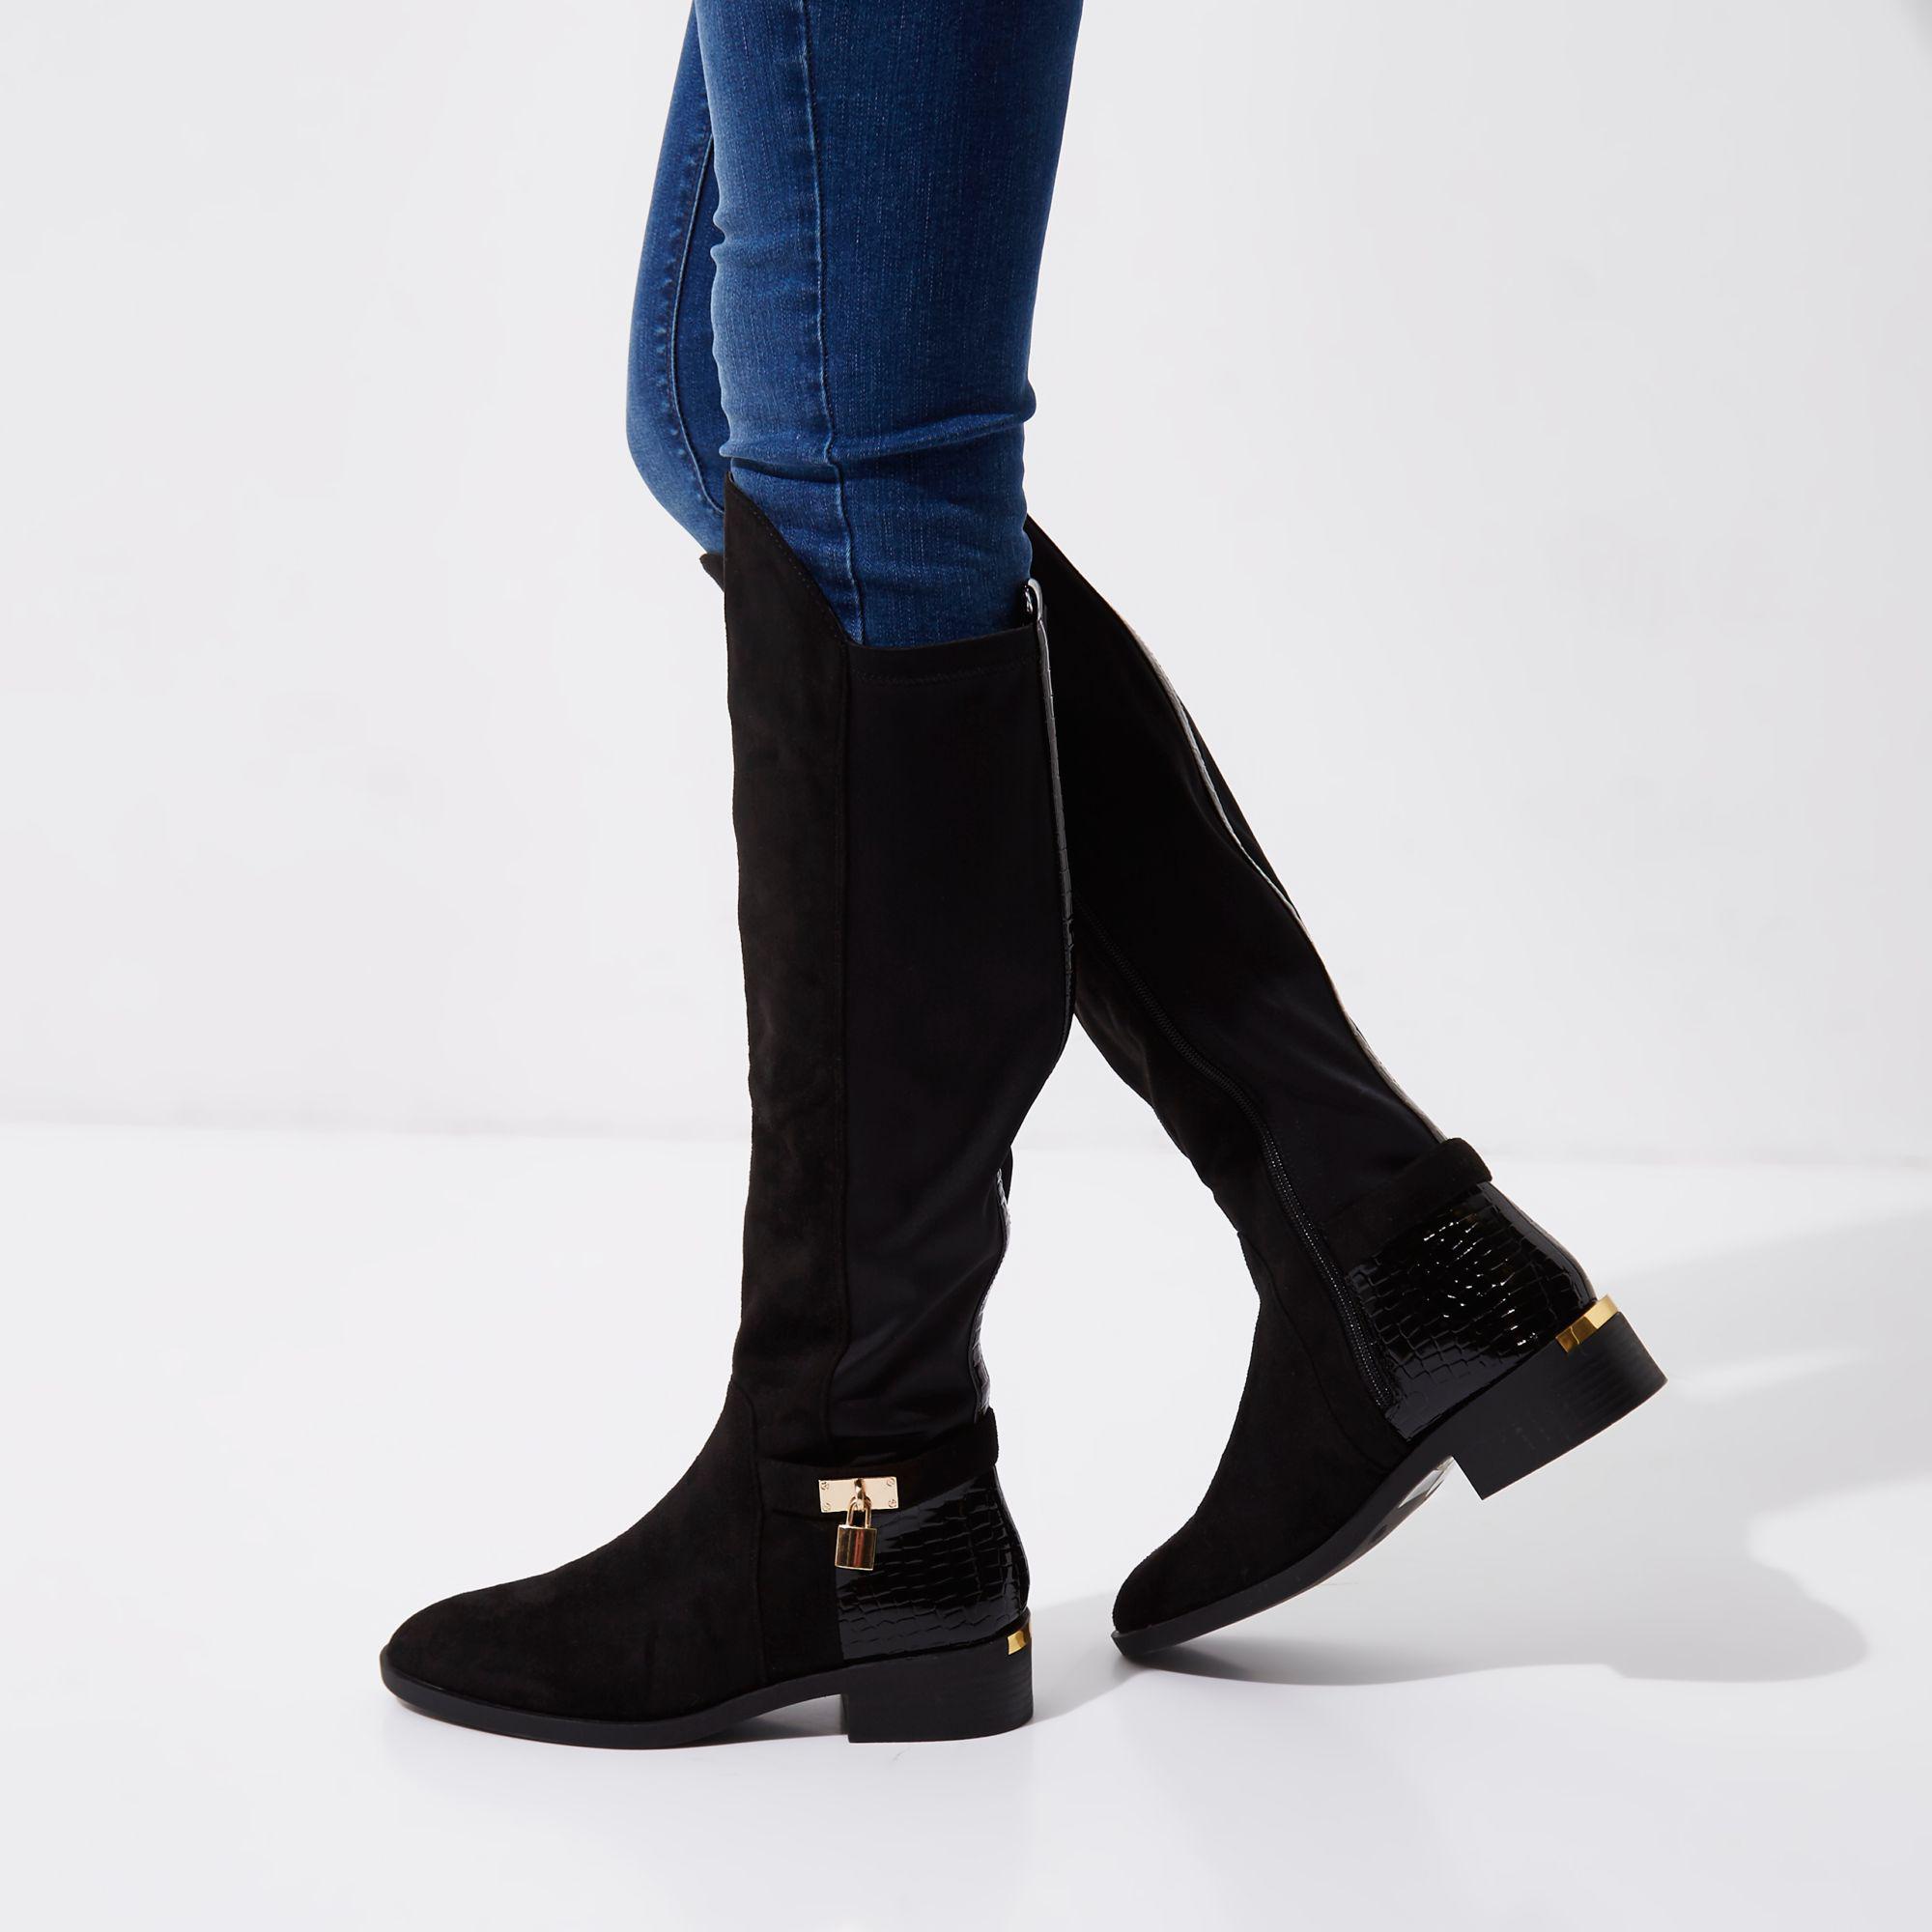 river island riding boots